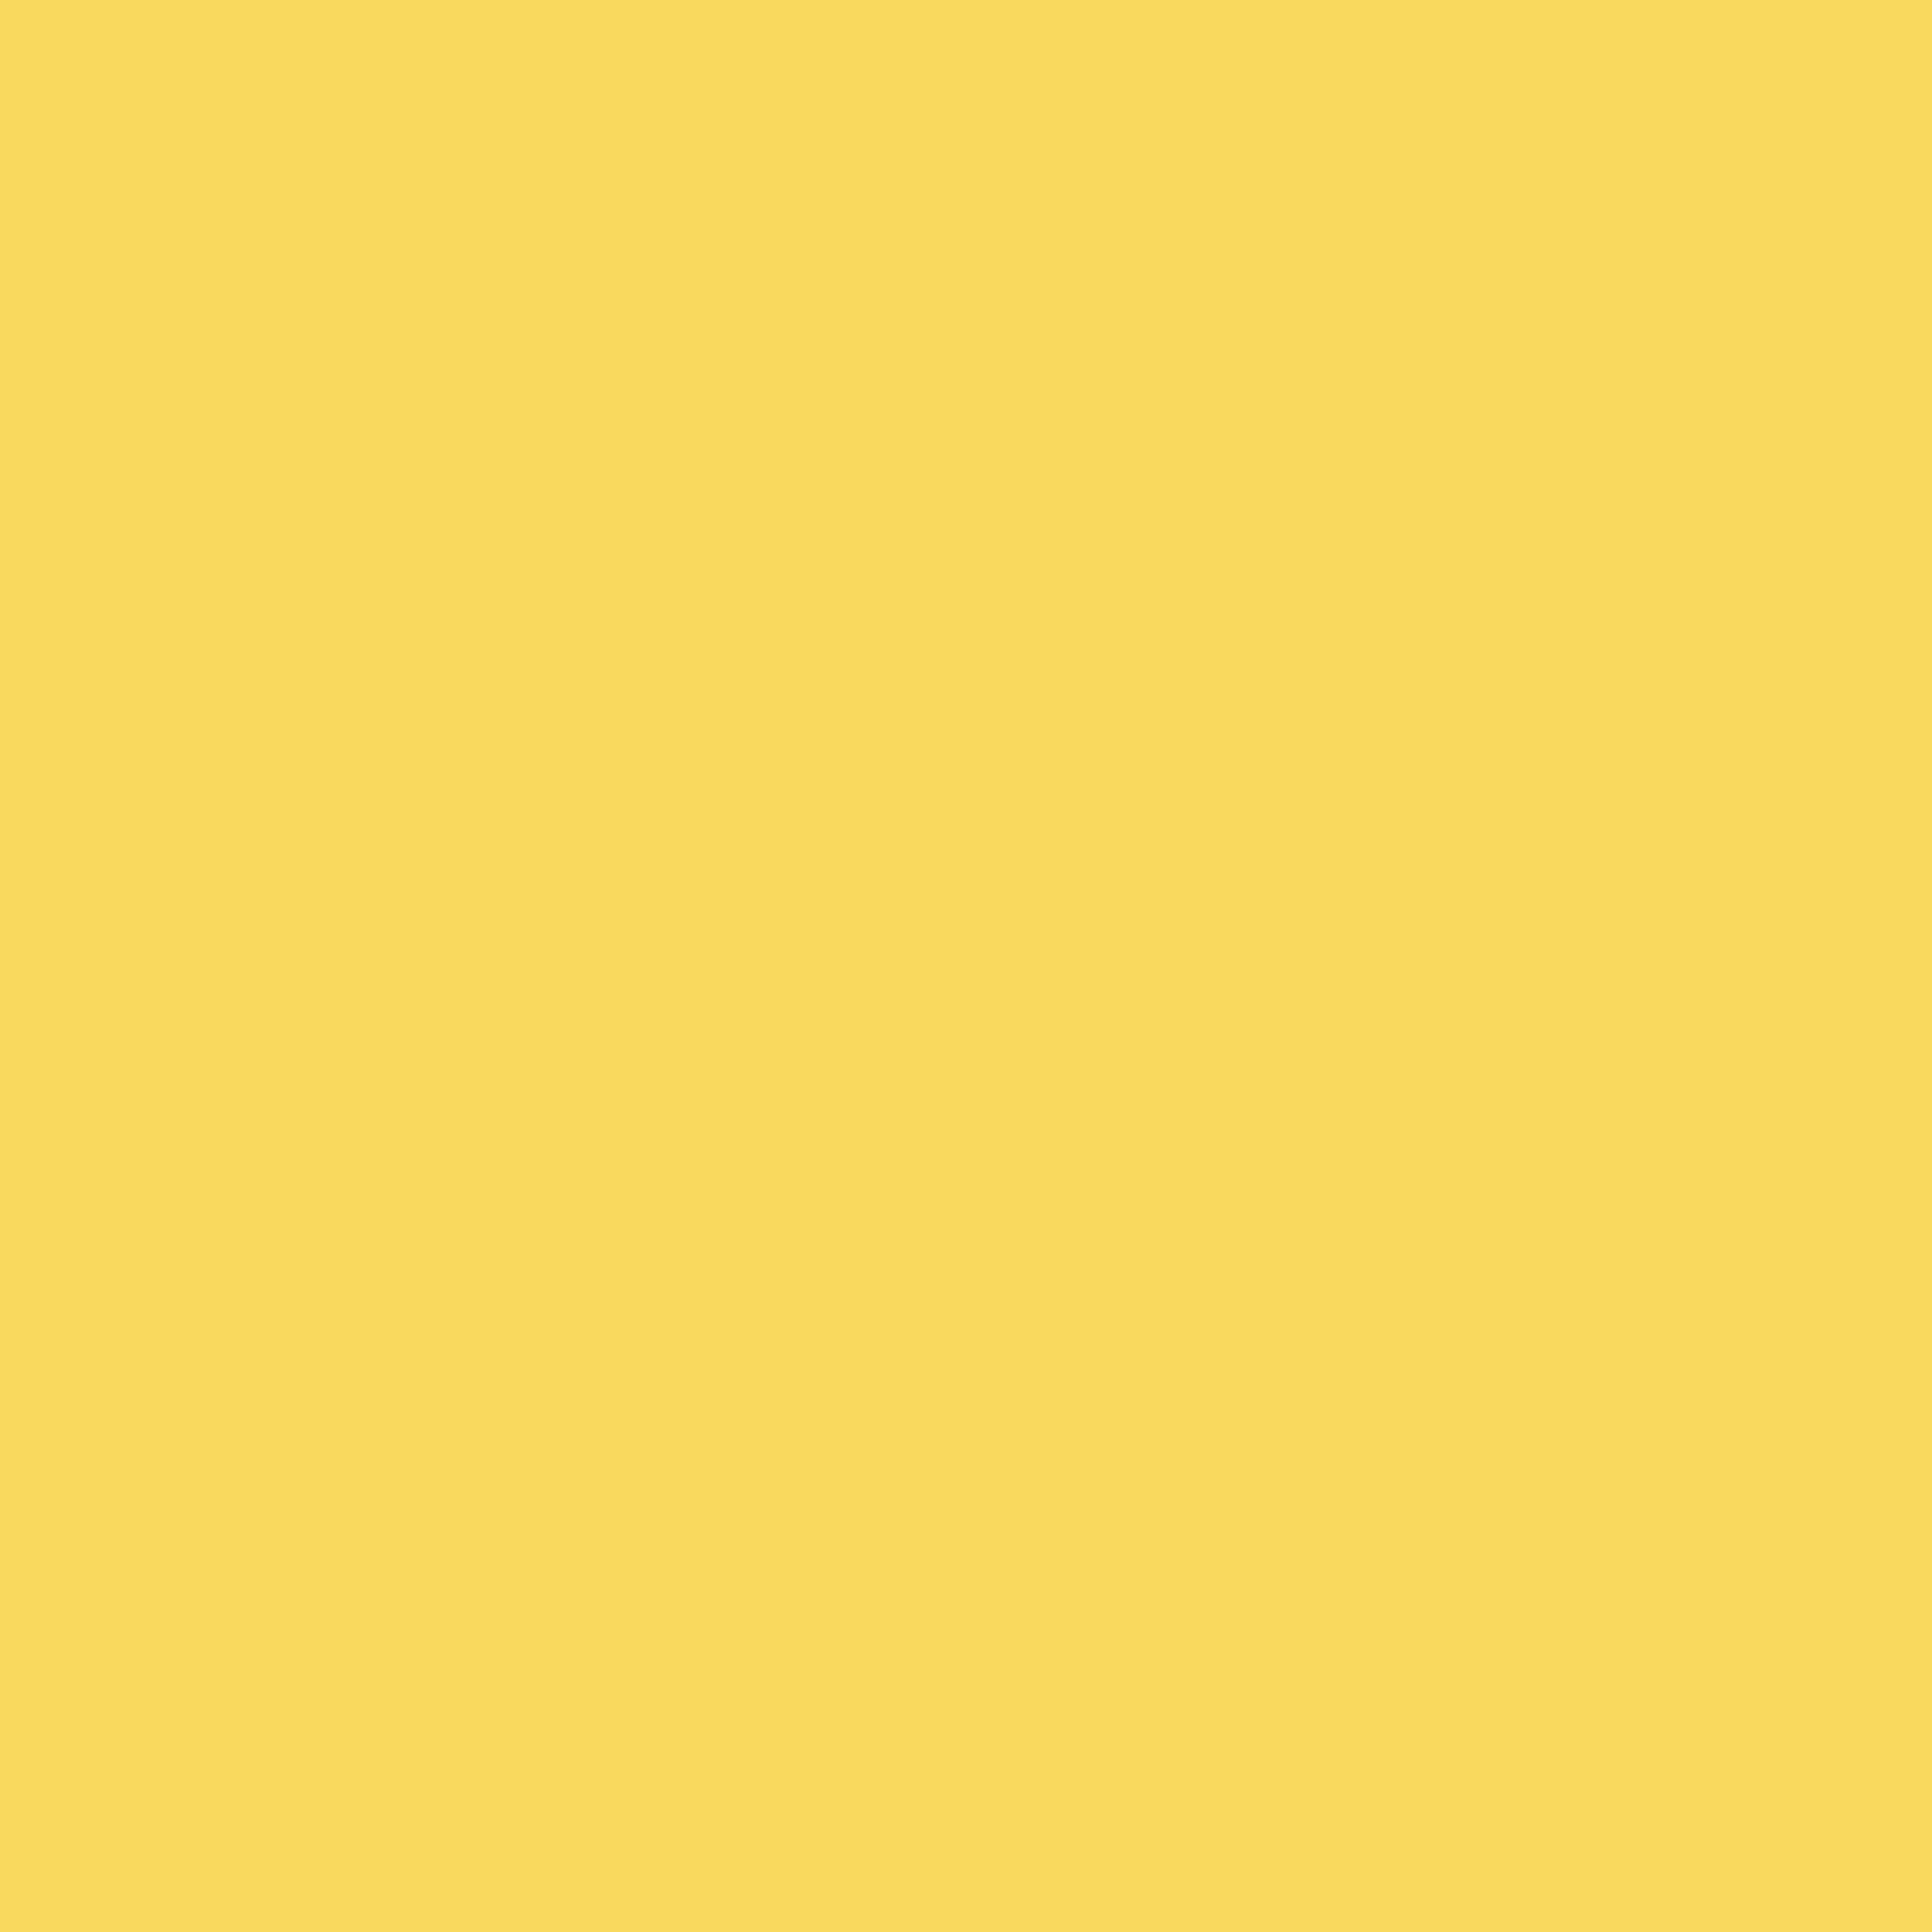 2732x2732 Royal Yellow Solid Color Background